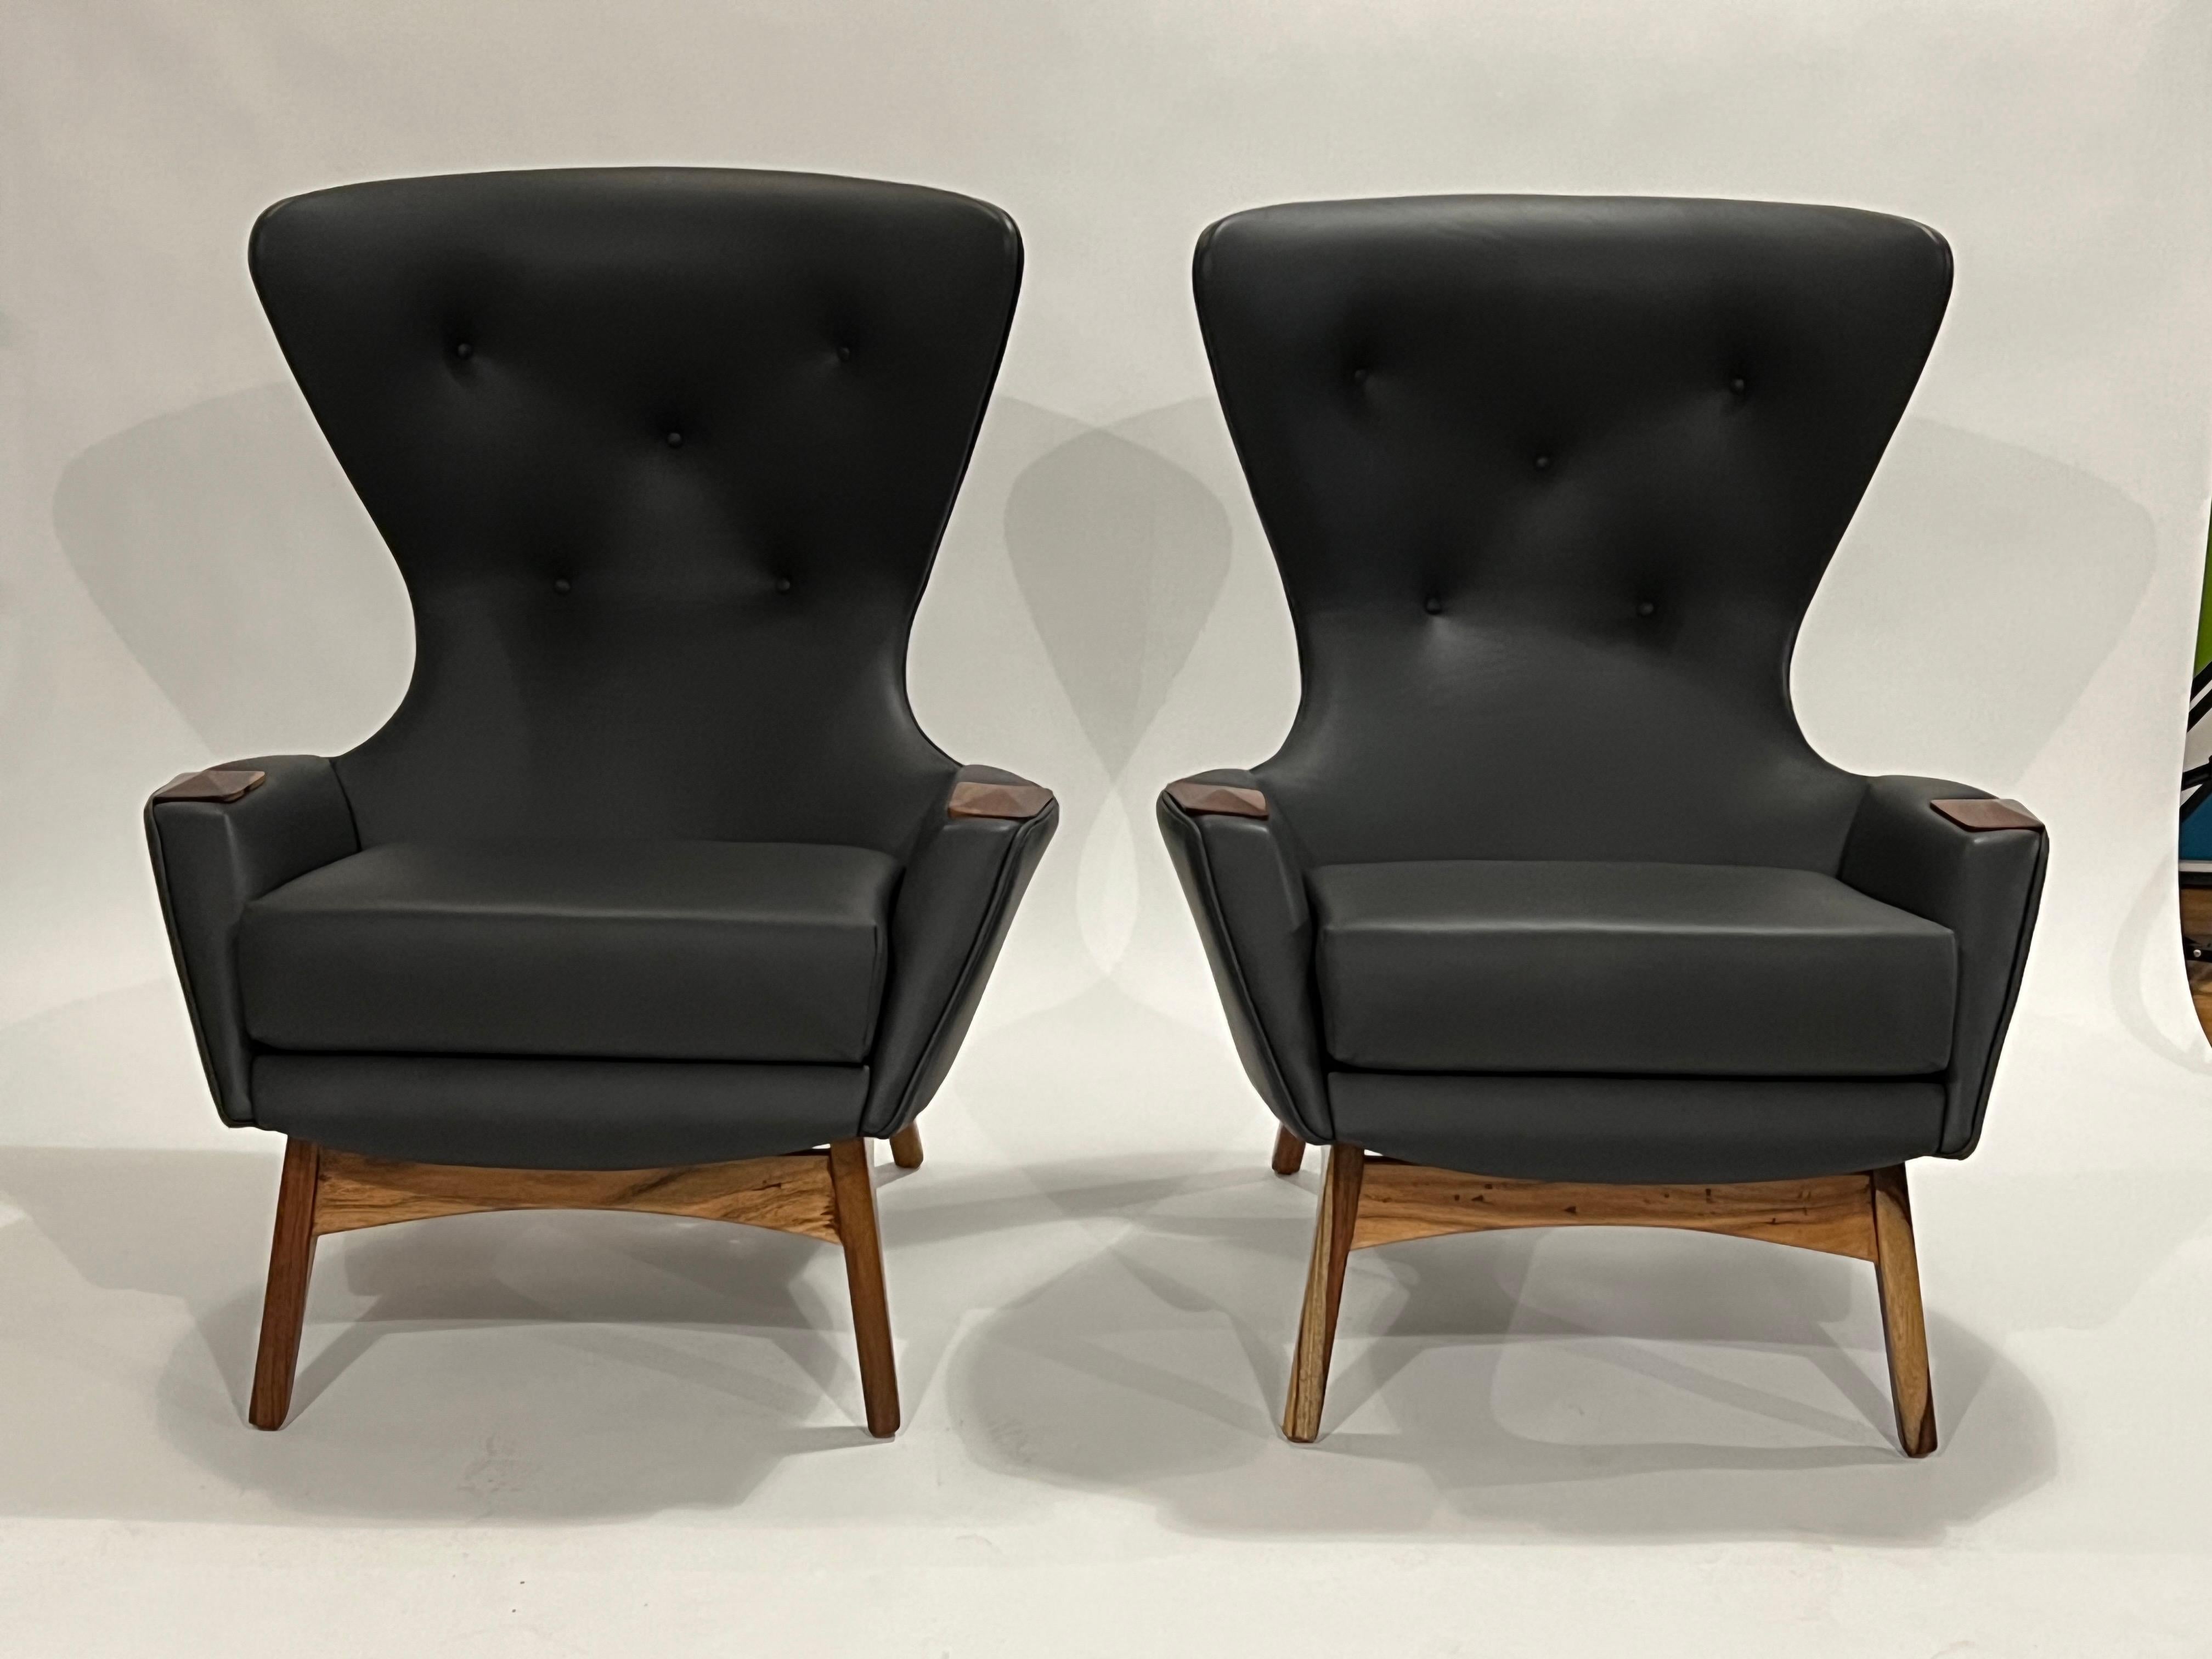 Pair of Adrian Pearsall wing chairs Model 2231-C in dark green leather (high quality hide from Herman Miller which almost looks black) and wood frame and accents which have been stripped and finished with a clear coat to expose the mixed woods.